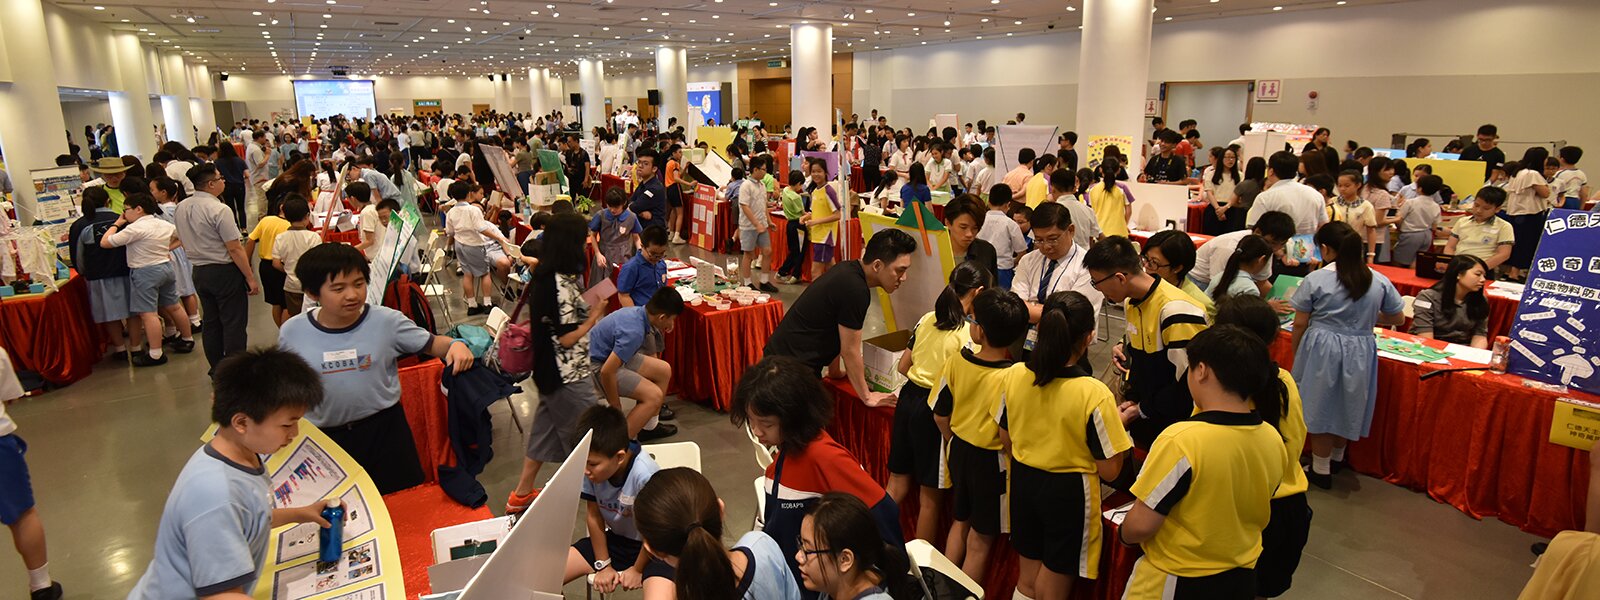 21st Primary STEM Project Exhibition “Development in STEM Generation – Living in a Smart City”